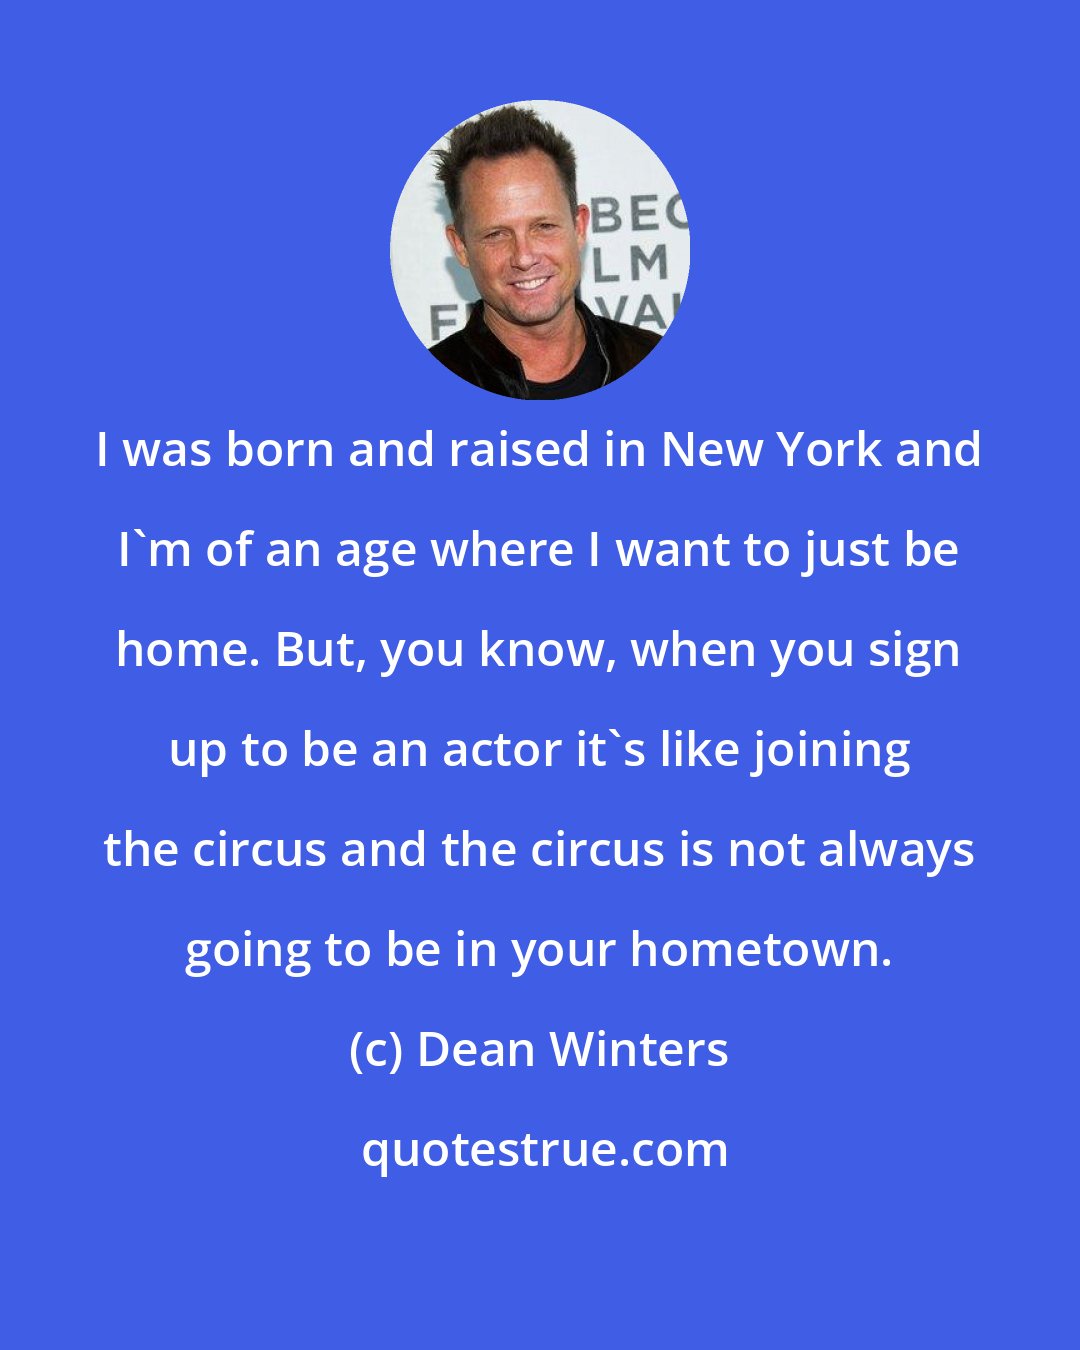 Dean Winters: I was born and raised in New York and I'm of an age where I want to just be home. But, you know, when you sign up to be an actor it's like joining the circus and the circus is not always going to be in your hometown.